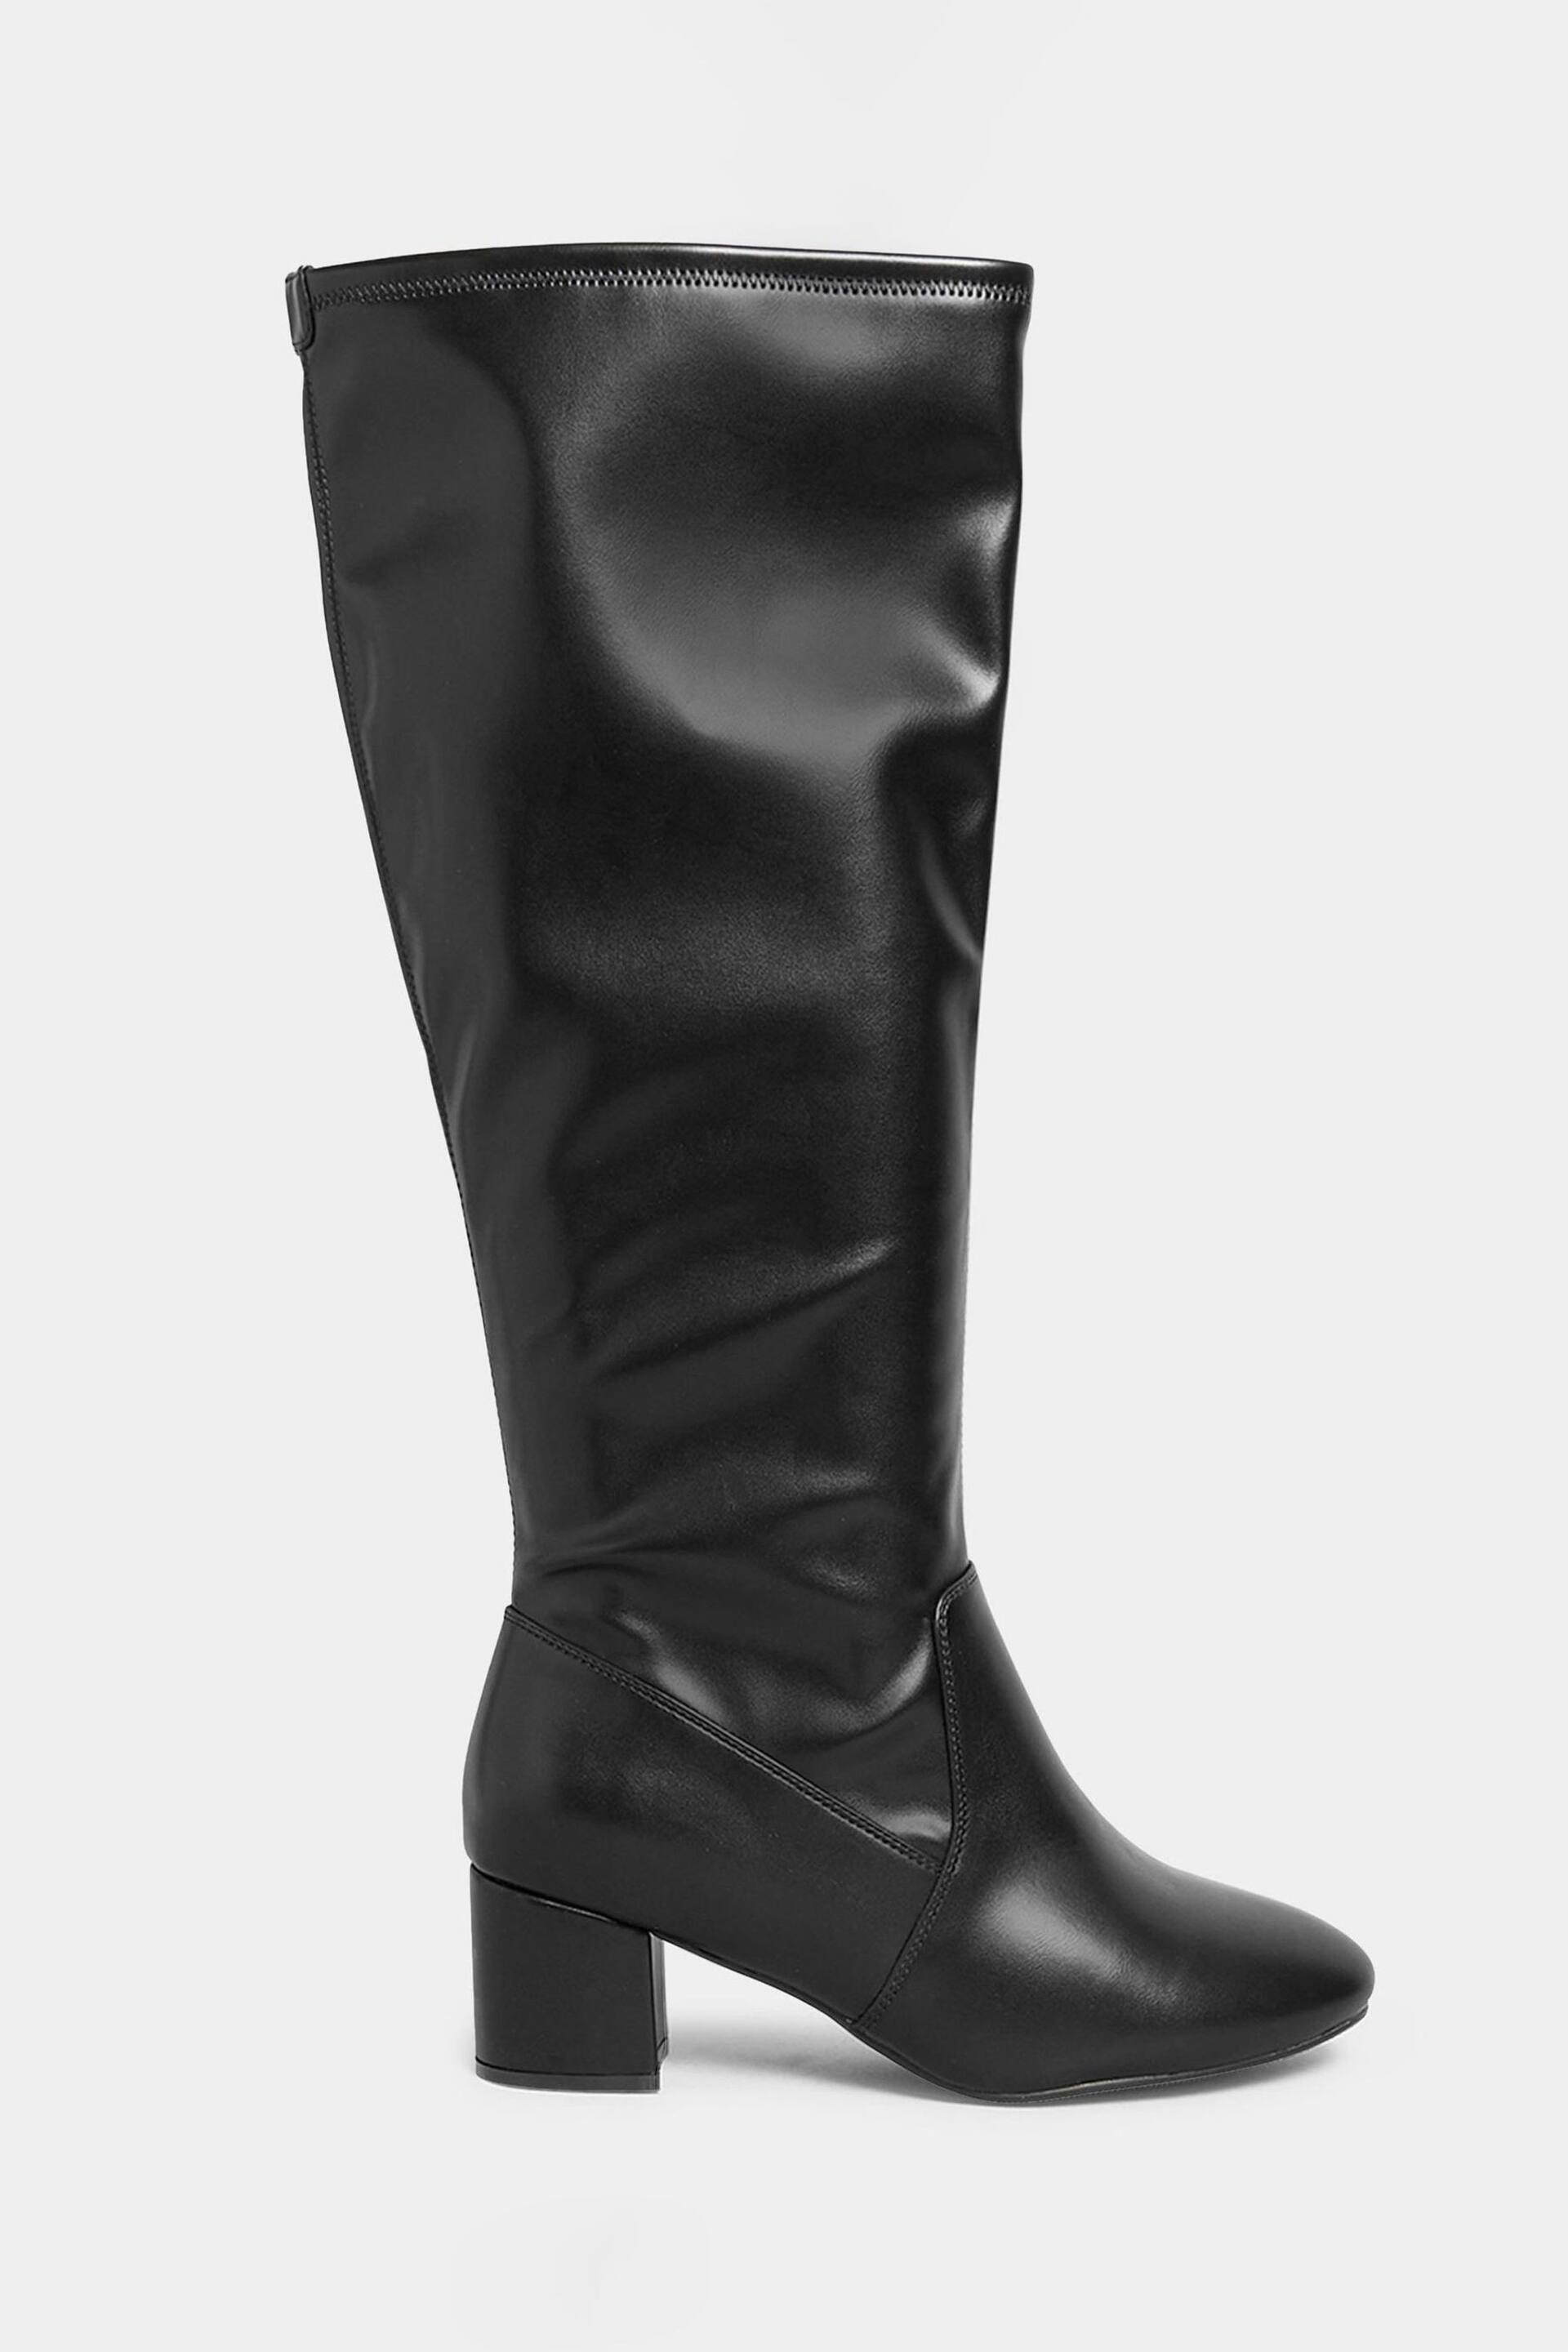 Yours Curve Black Wide Fit Stretch Knee High PU Boots - Image 1 of 5